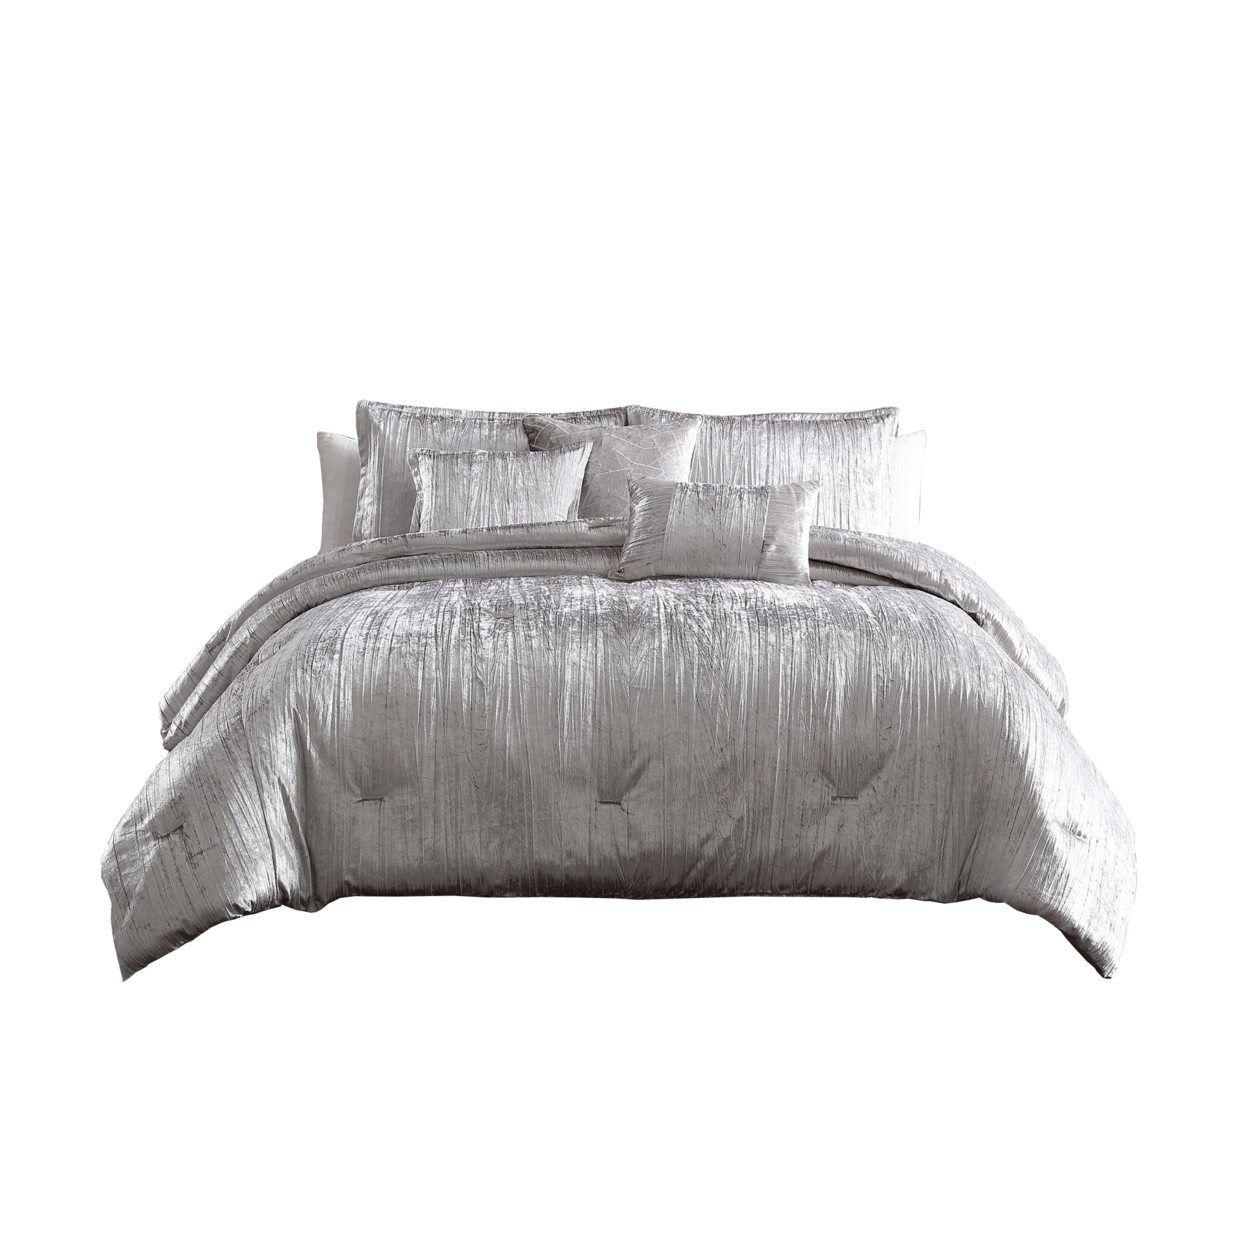 Queen Size 7 Piece Fabric Comforter Set With Crinkle Texture, Silver- Saltoro Sherpi